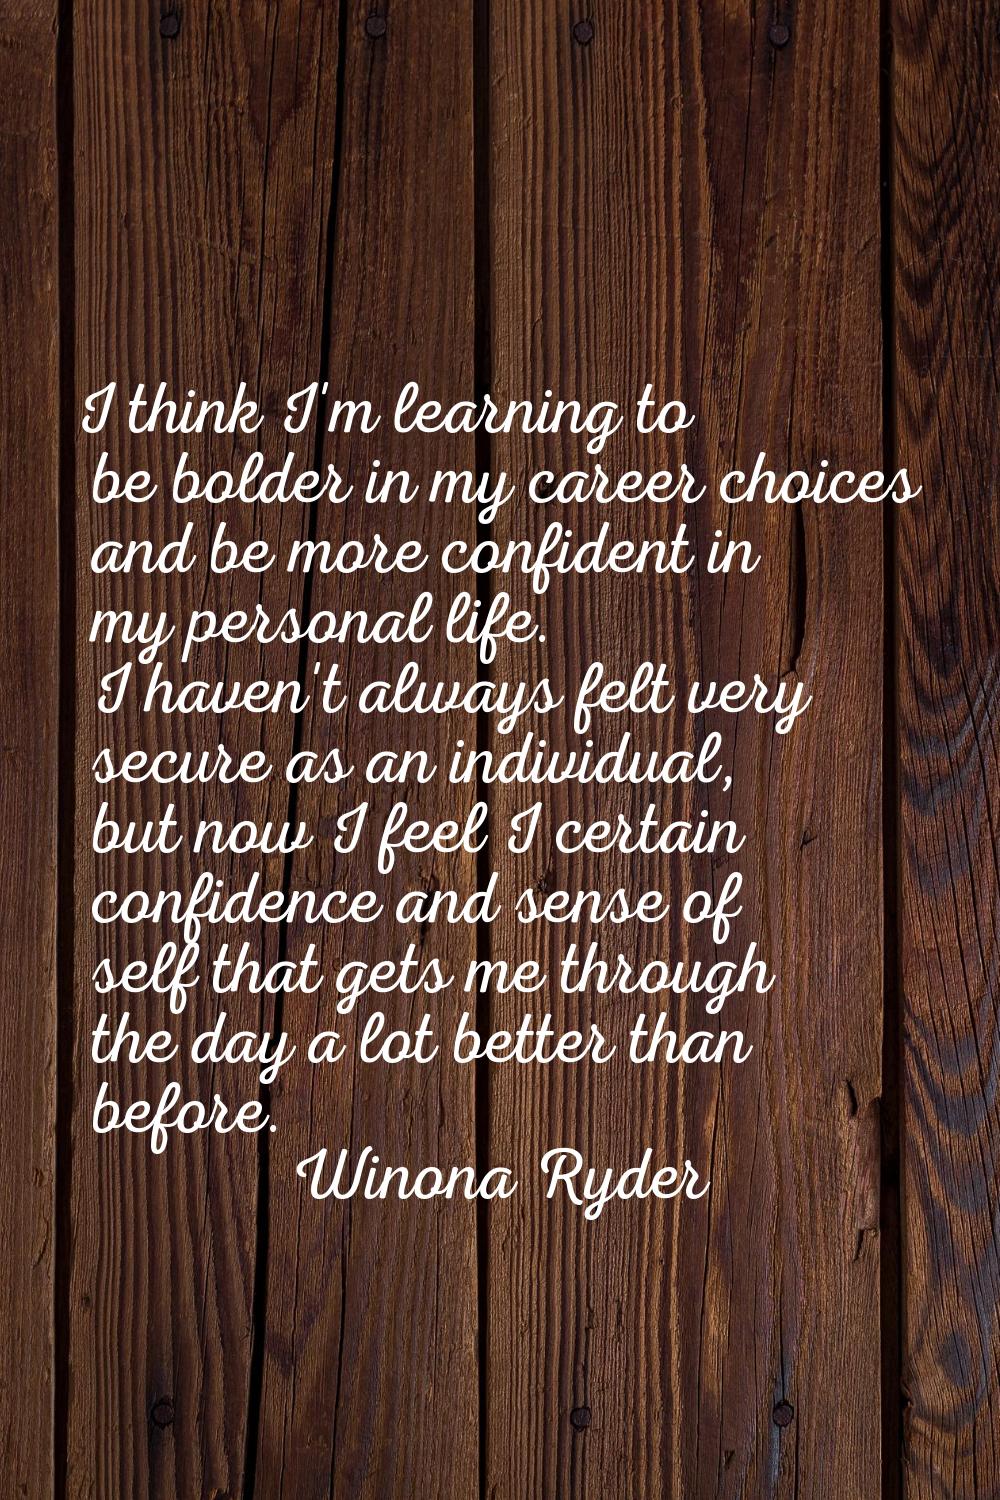 I think I'm learning to be bolder in my career choices and be more confident in my personal life. I